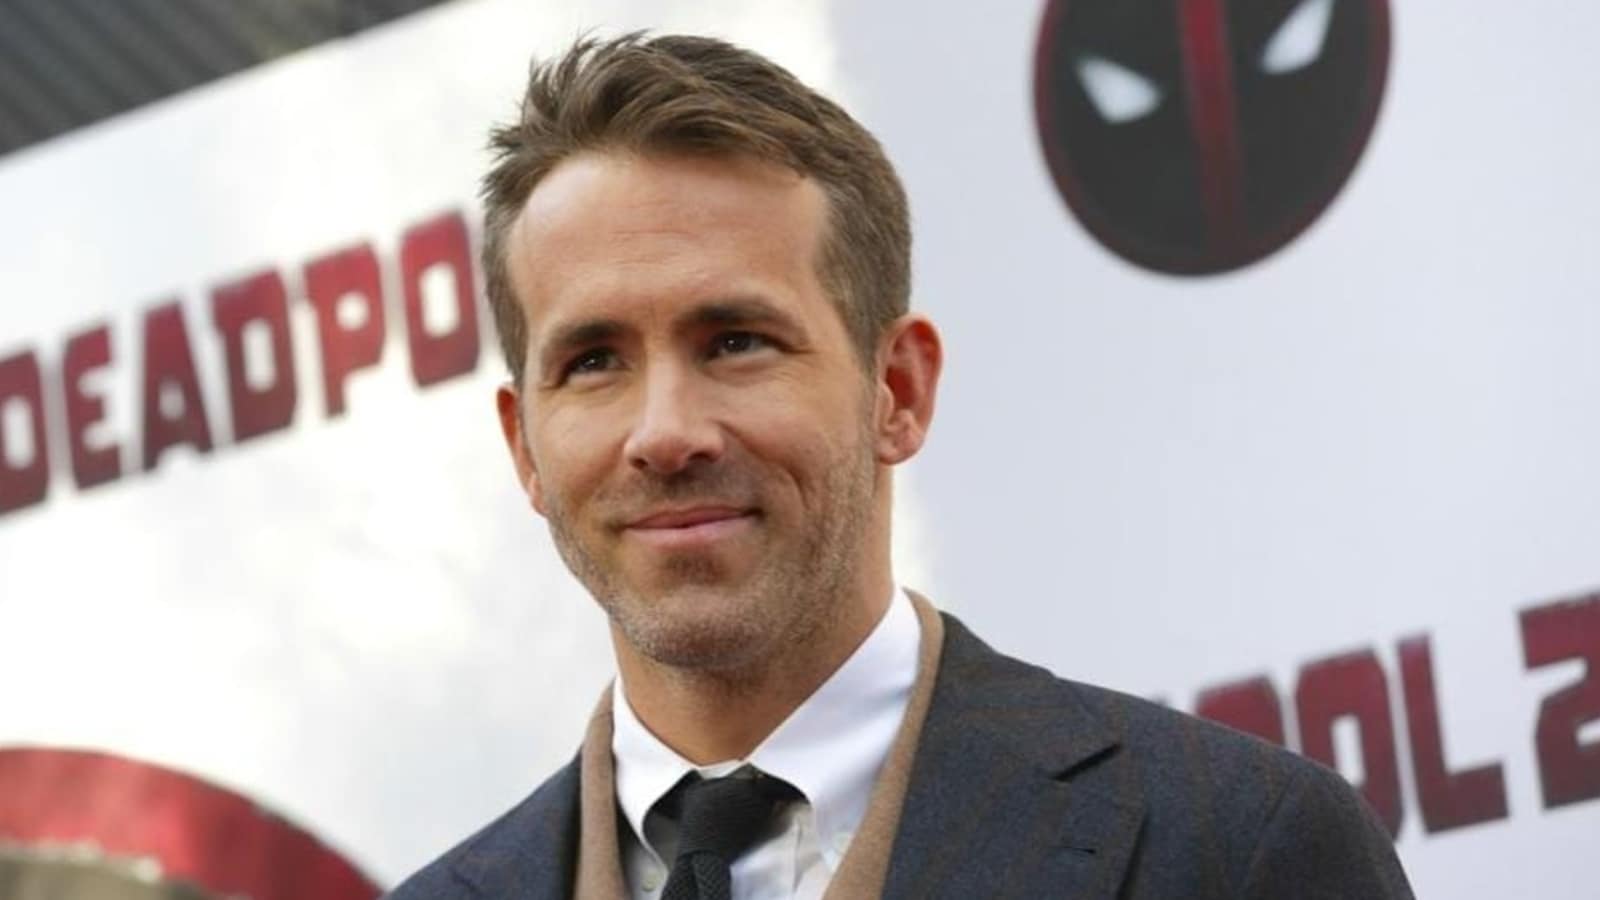 Ryan Reynolds reacts to Deadpool 3 photo leaks, says film is for audience’s joy | Hollywood